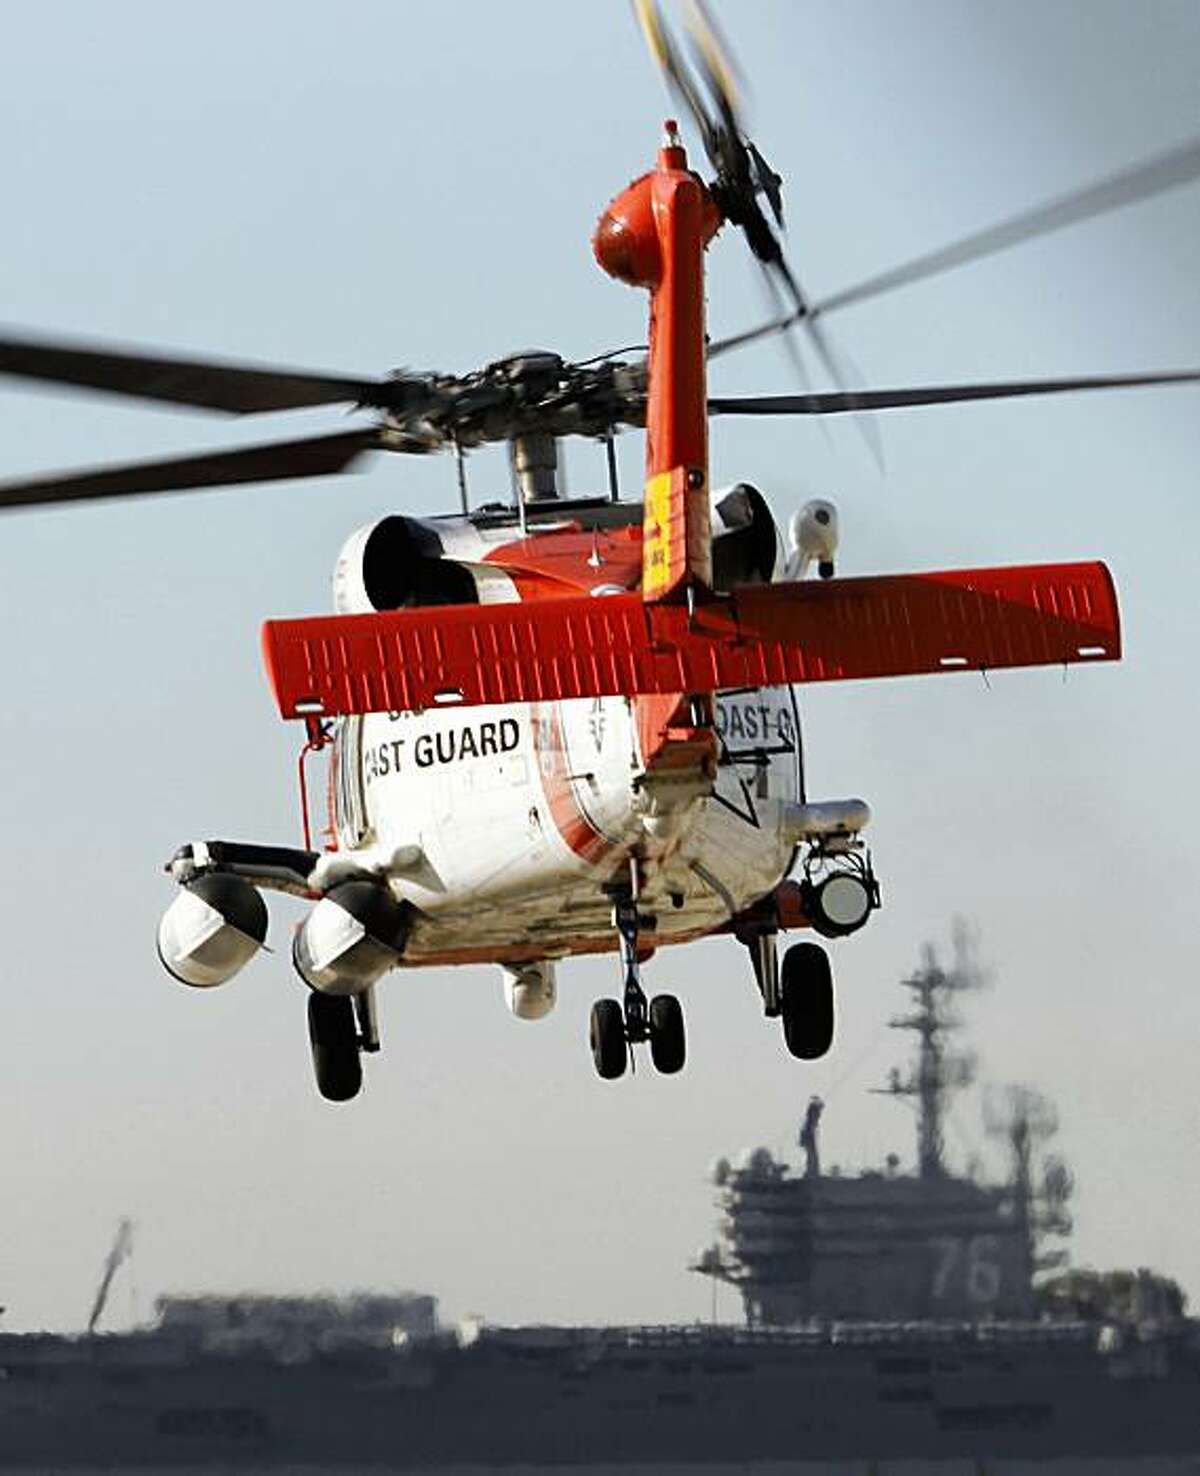 FILE -- A U.S. Coast Guard MH-60 Jayhawk helicopter lifts off at the San Diego Coast Guard Station during a search effort Friday, Oct. 30, 2009, in San Diego.